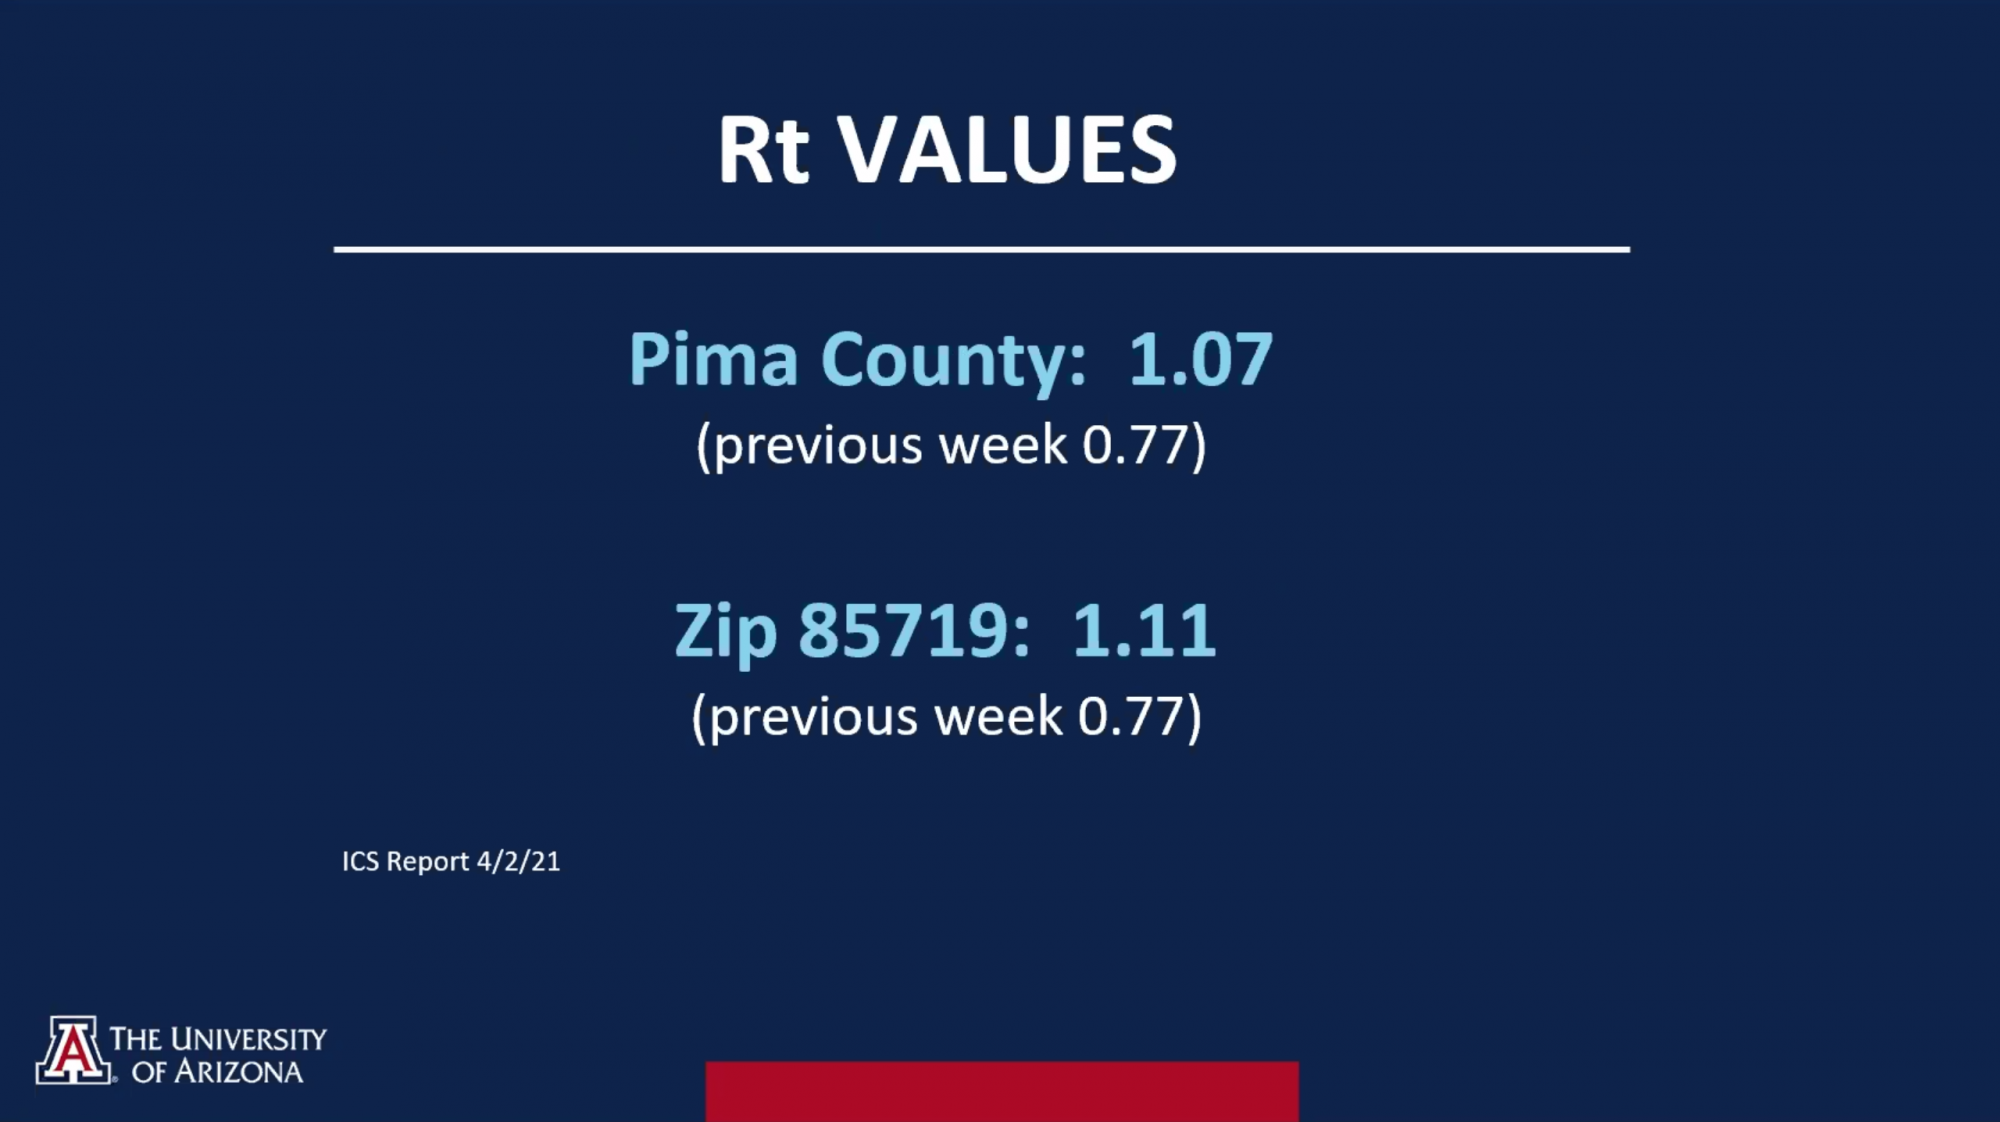 Screenshot of rate of transmission values from the past week: both Pima County and the university's zip code has increased over the past week.